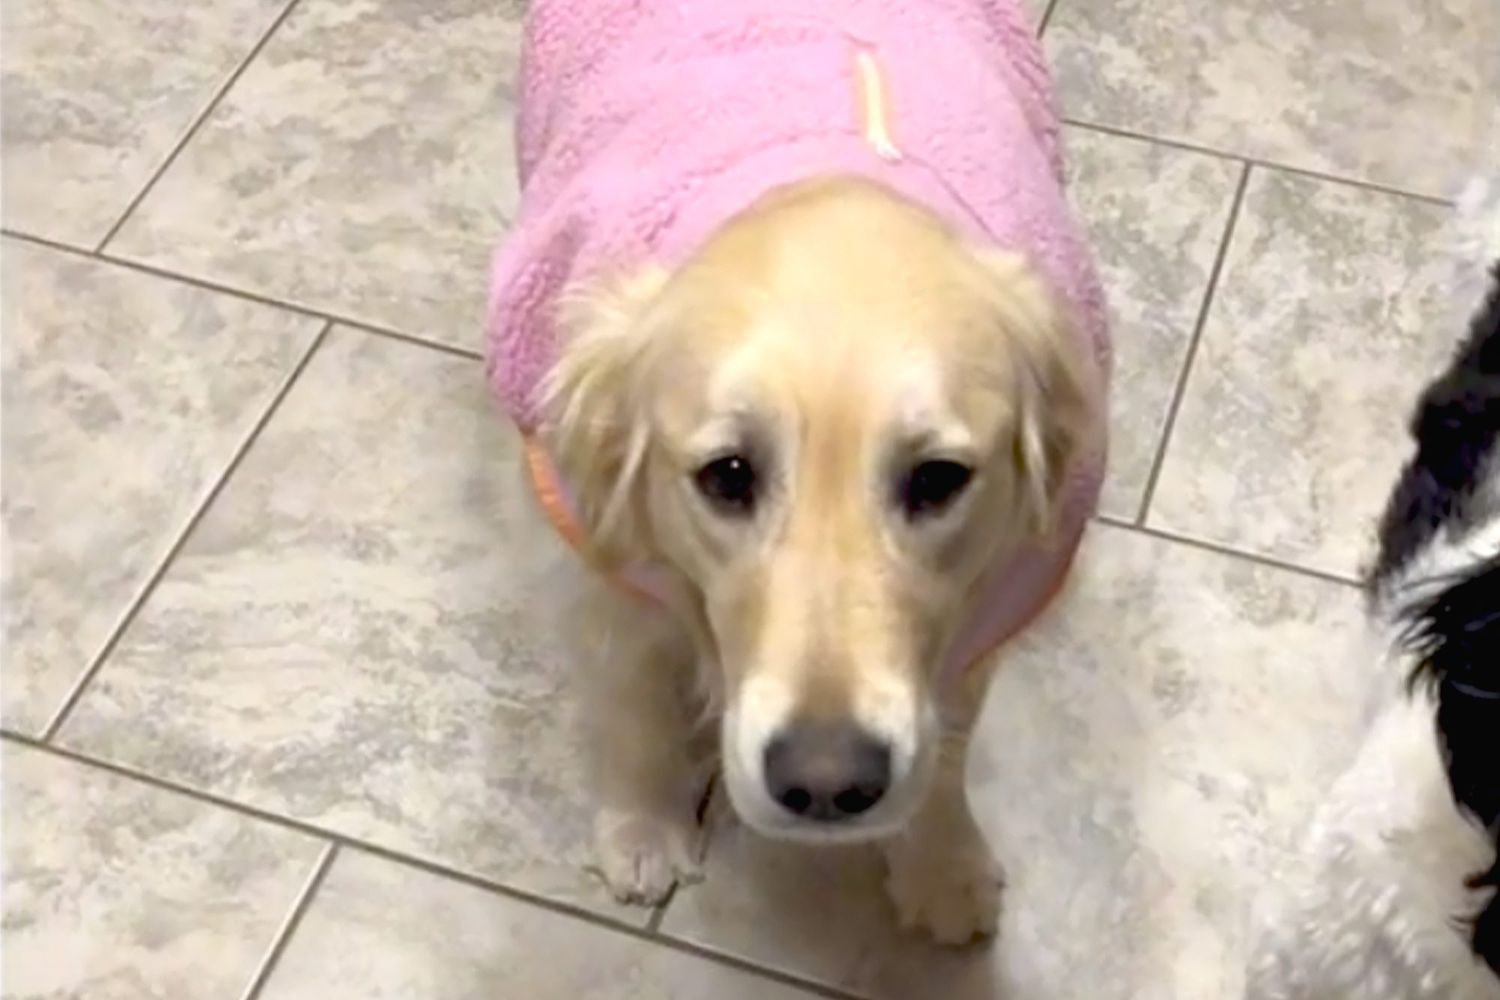 Large yellow dog in a pink sweater on a tile floor